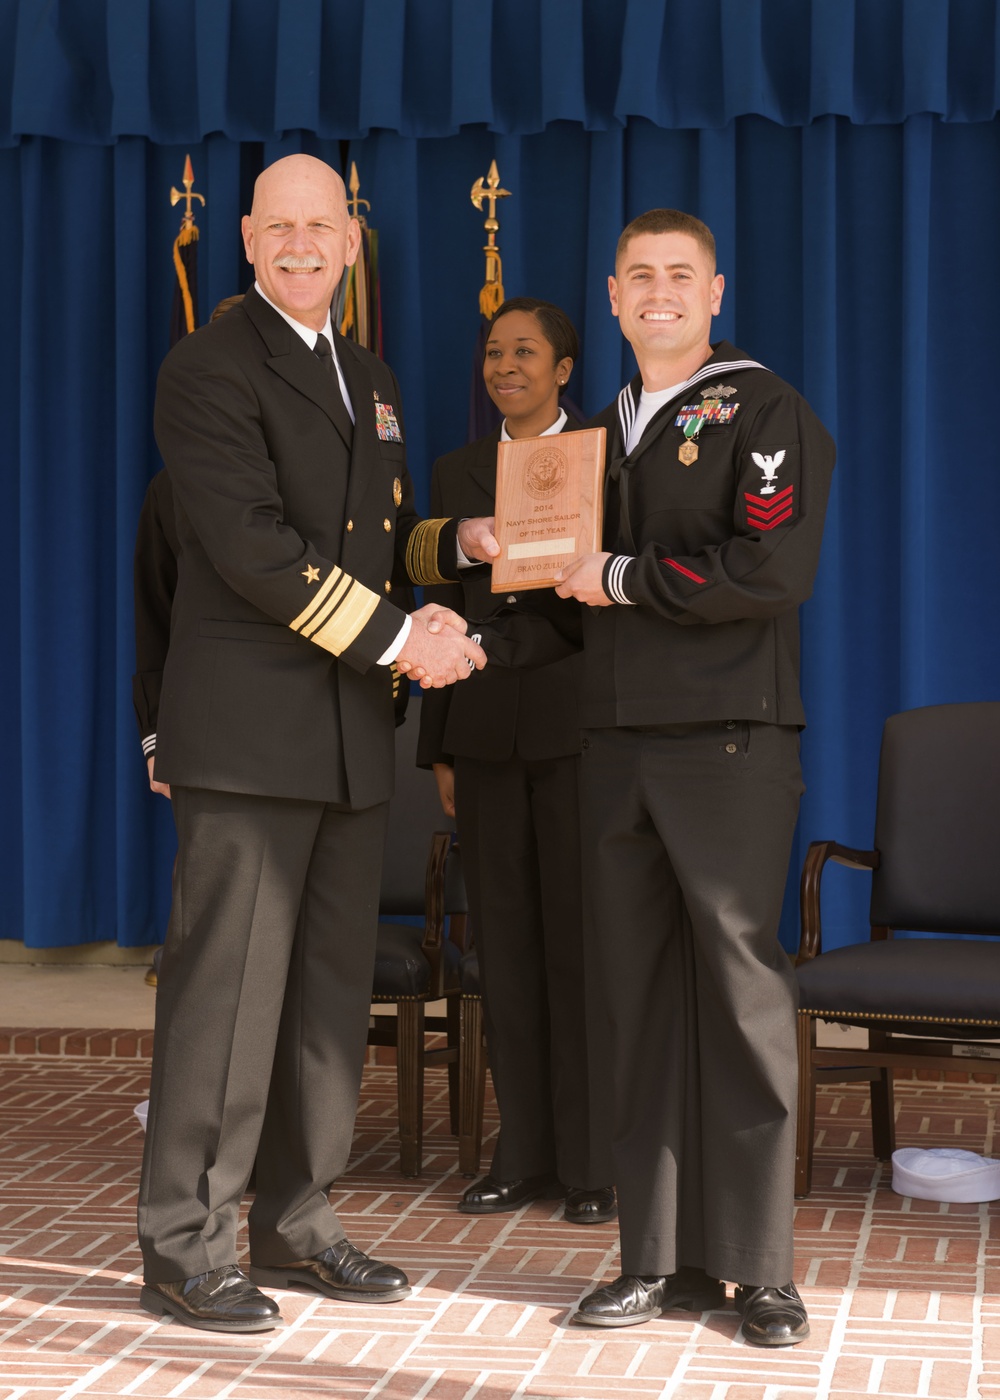 2015 Shore Sailor of the Year ceremony